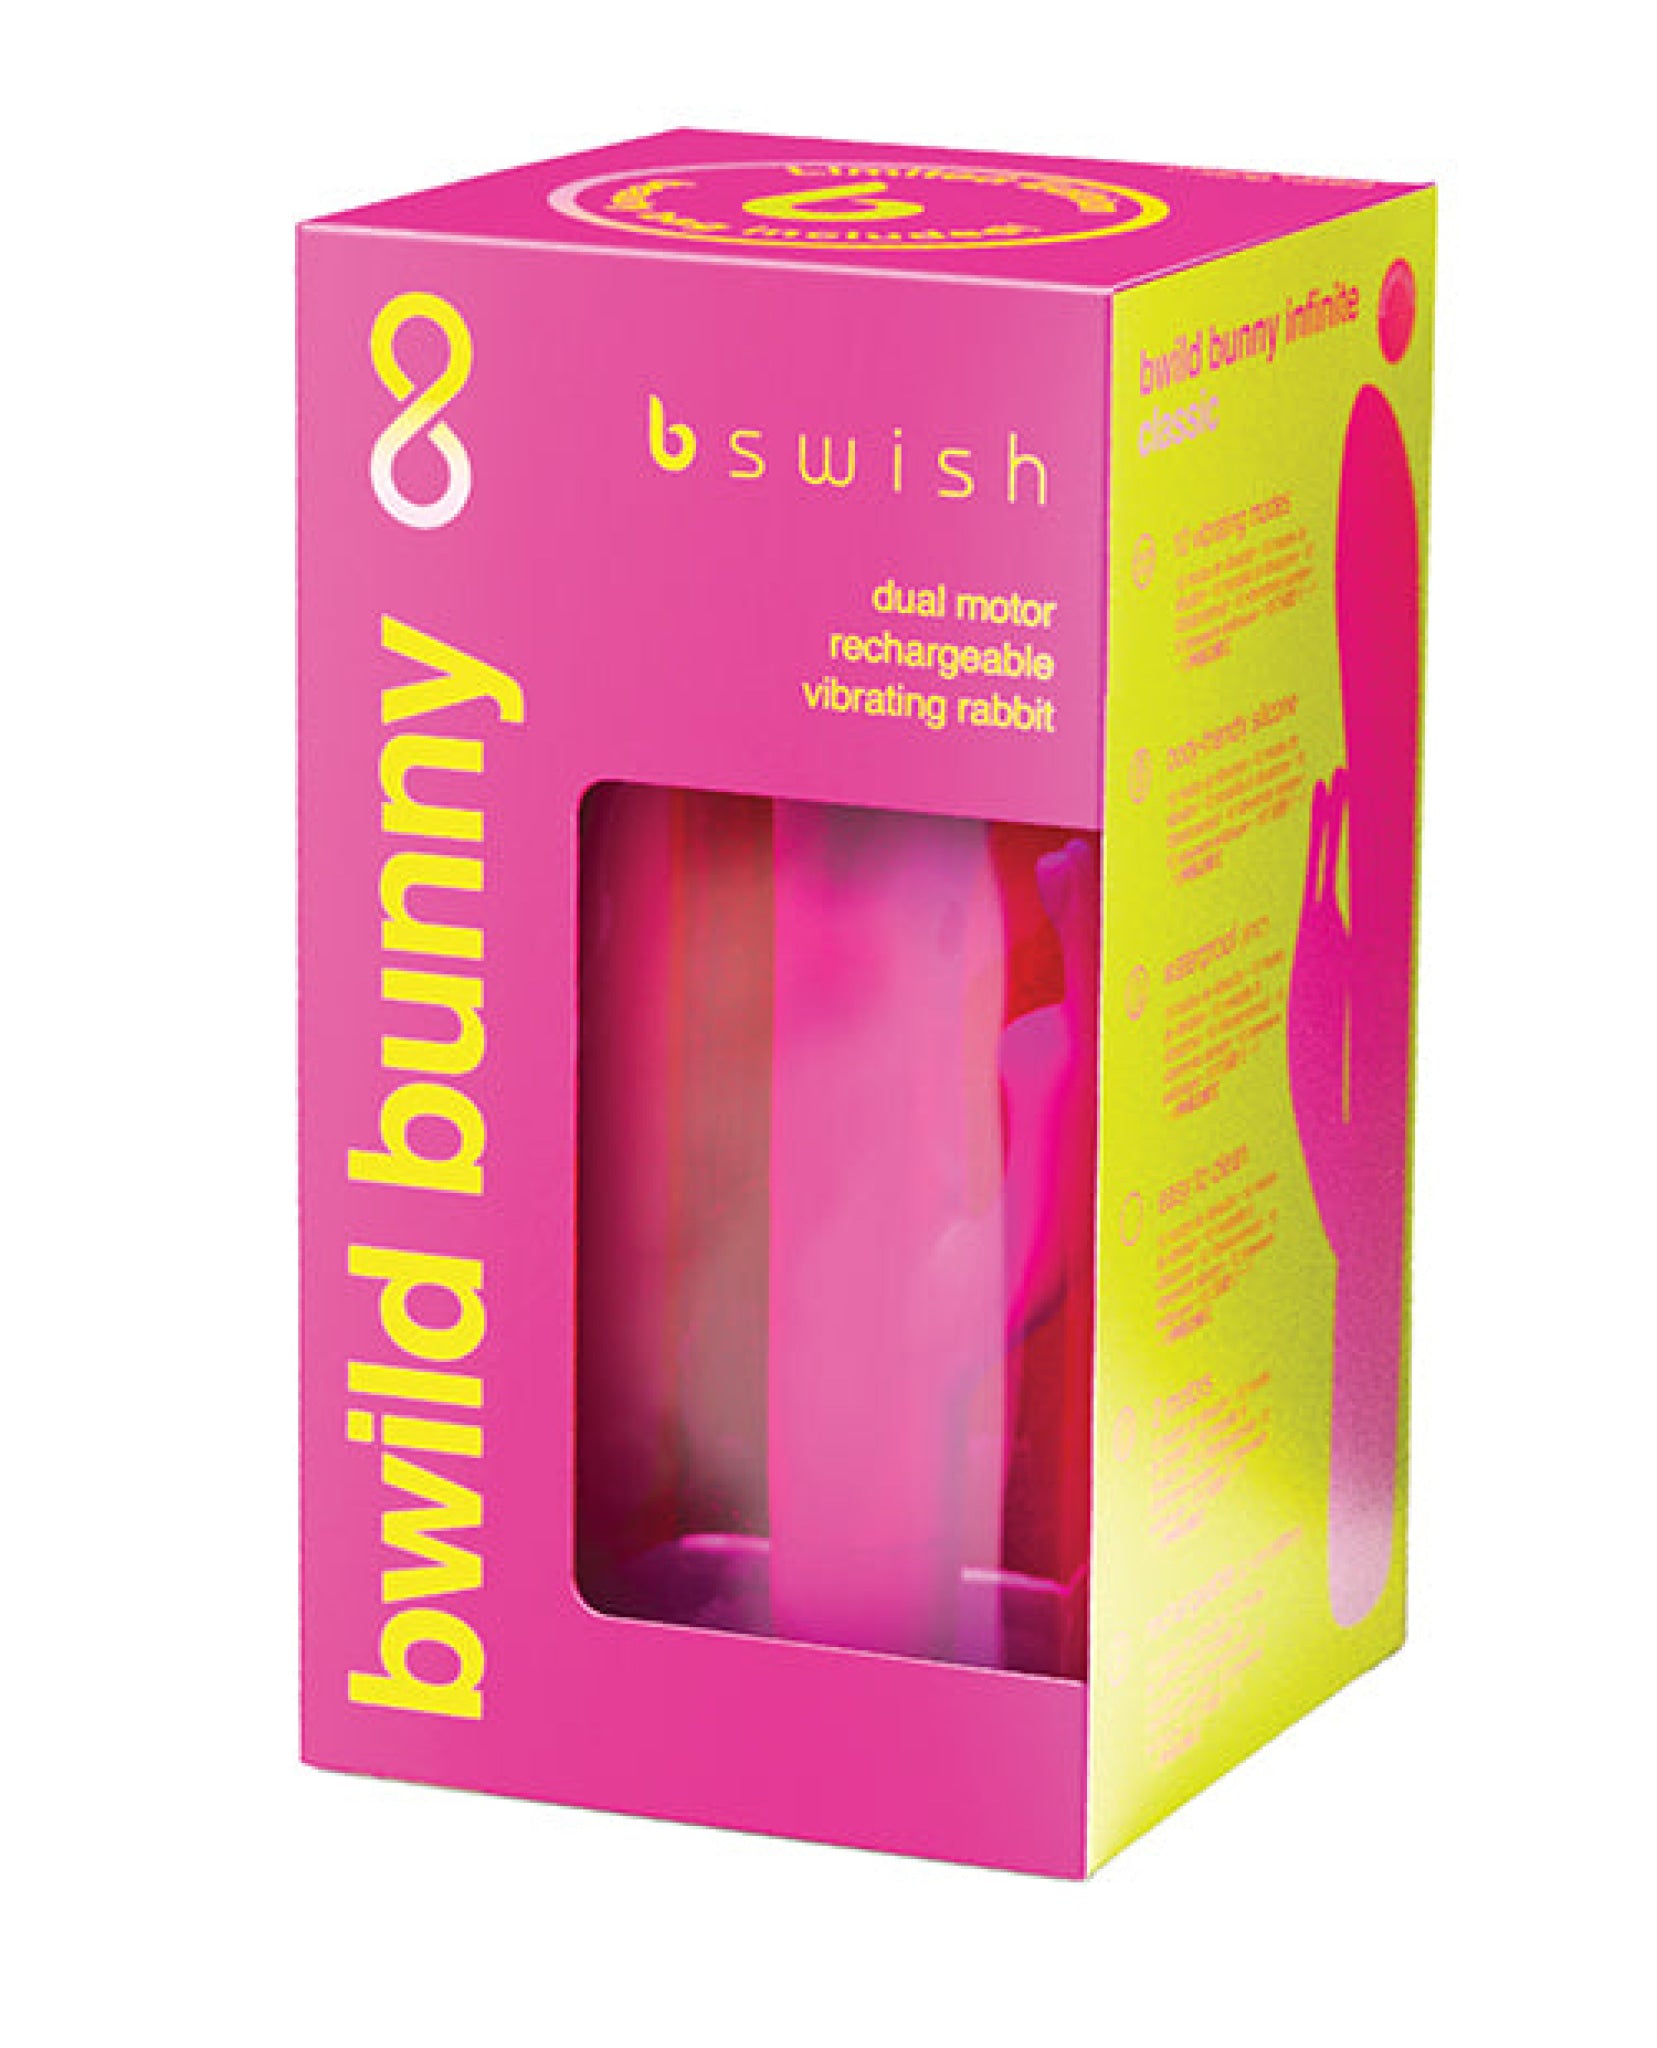 Bwild Infinite Classic Limited Edition Bunny Bswish